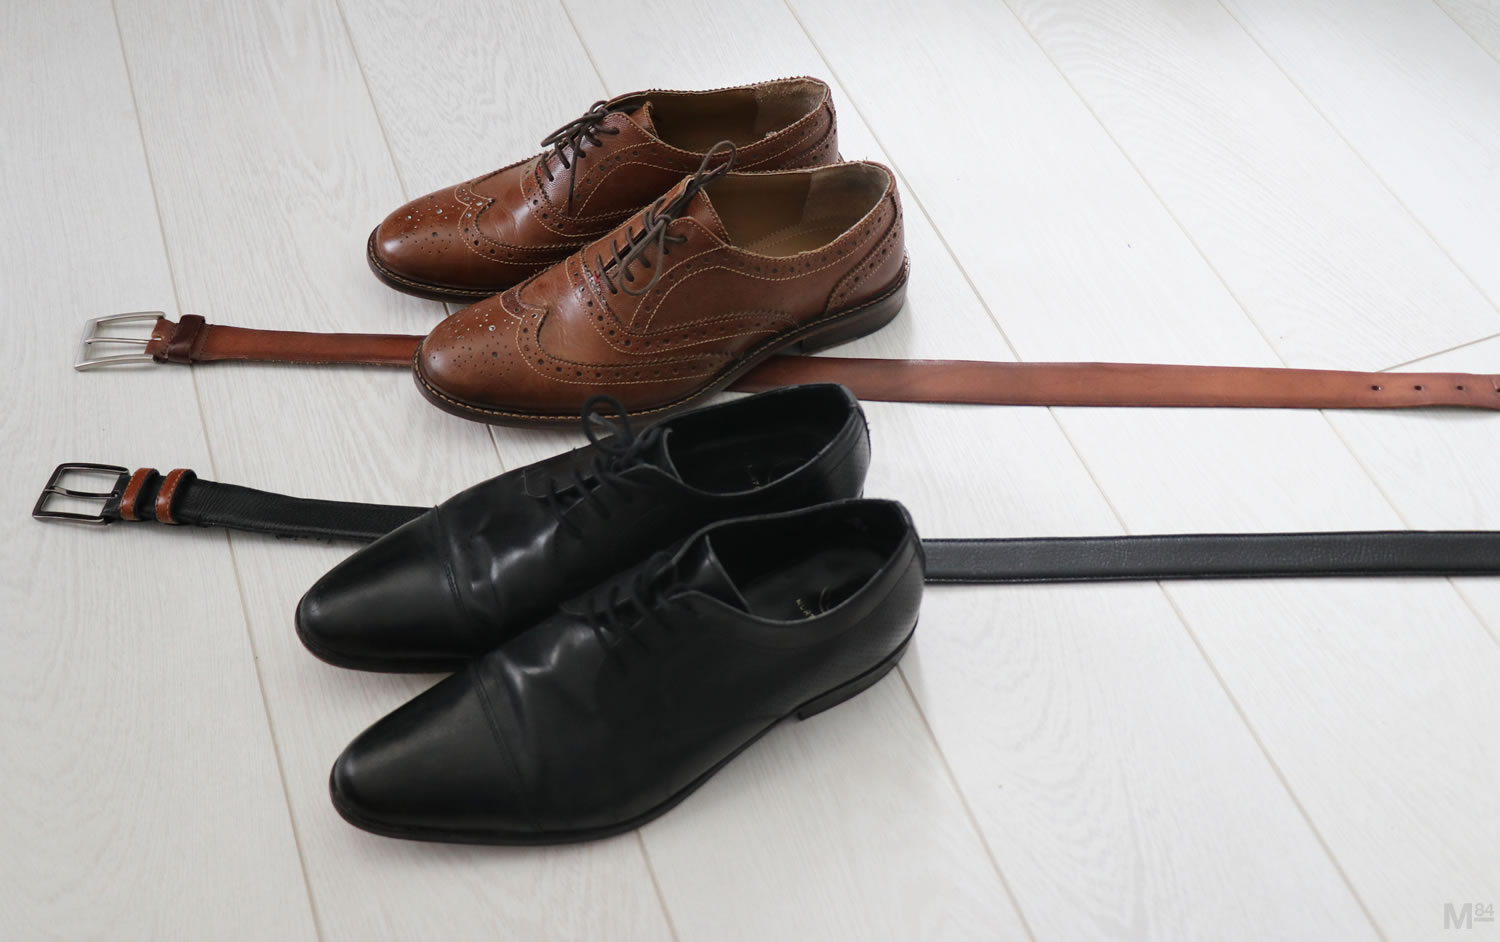 Do Your Belt And Shoes Have To Match? Here's How To Know | Michael 84